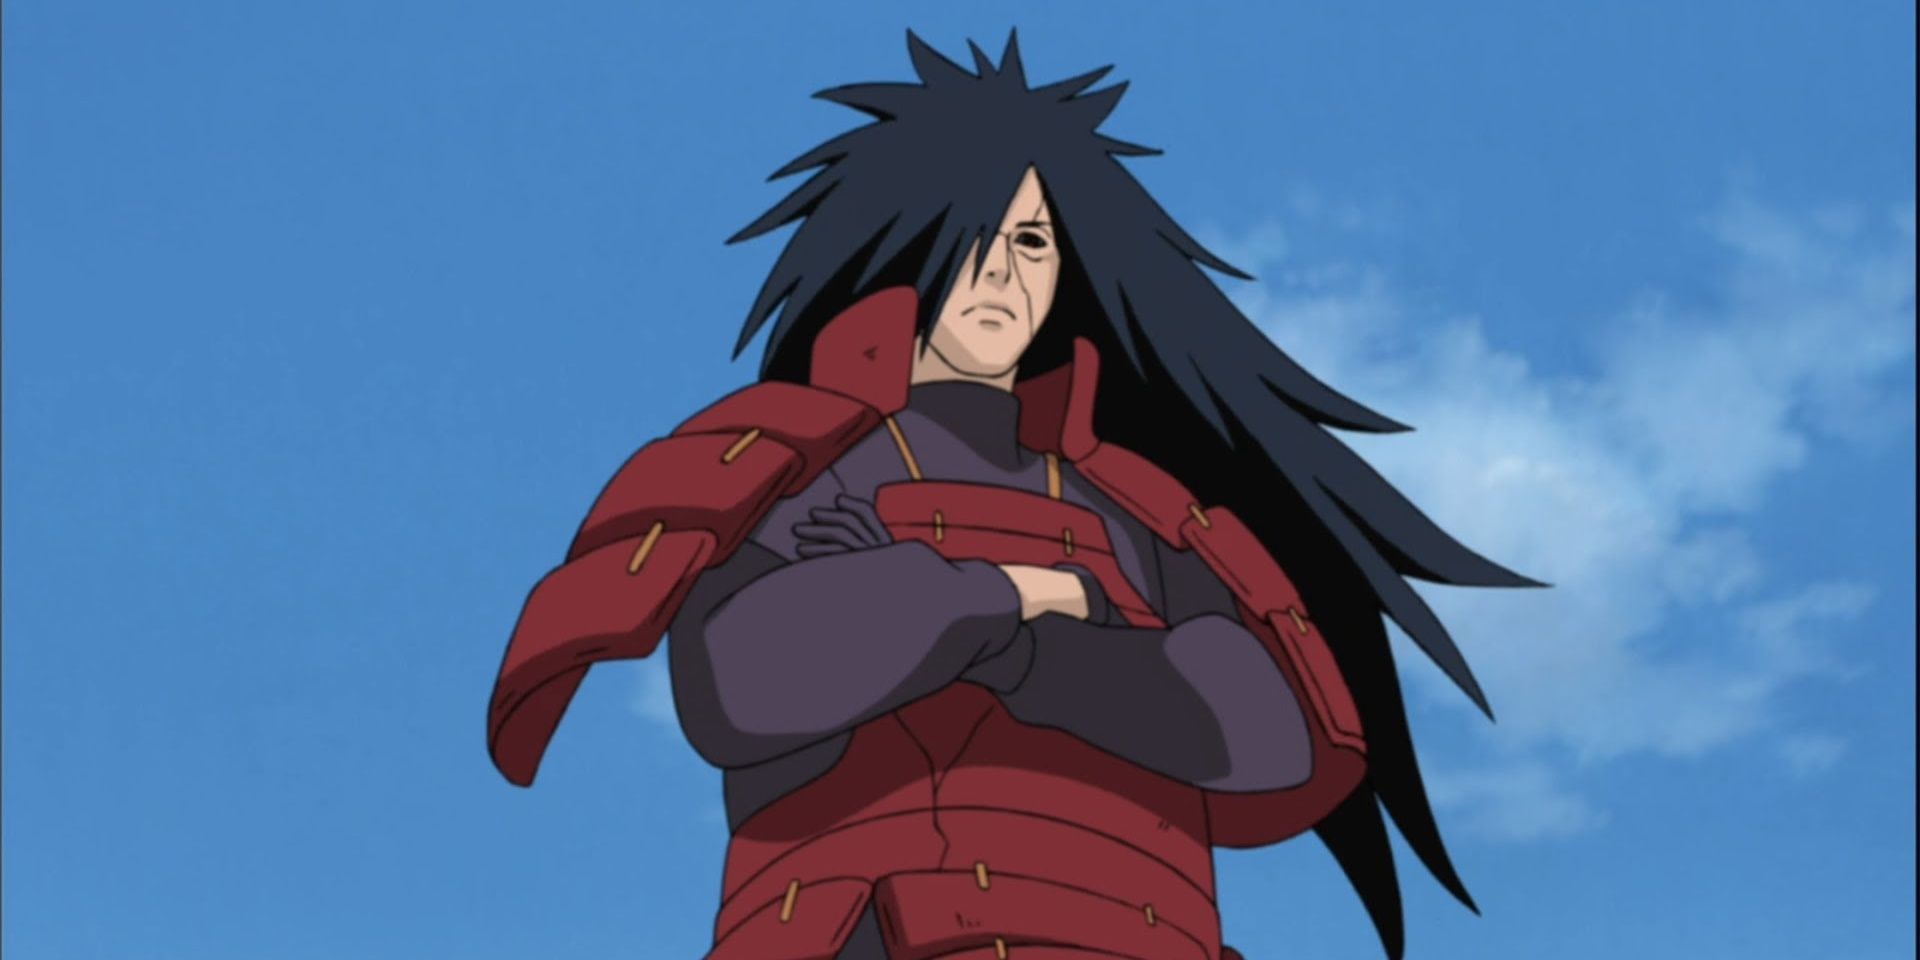 Madara looks down on all his attacker